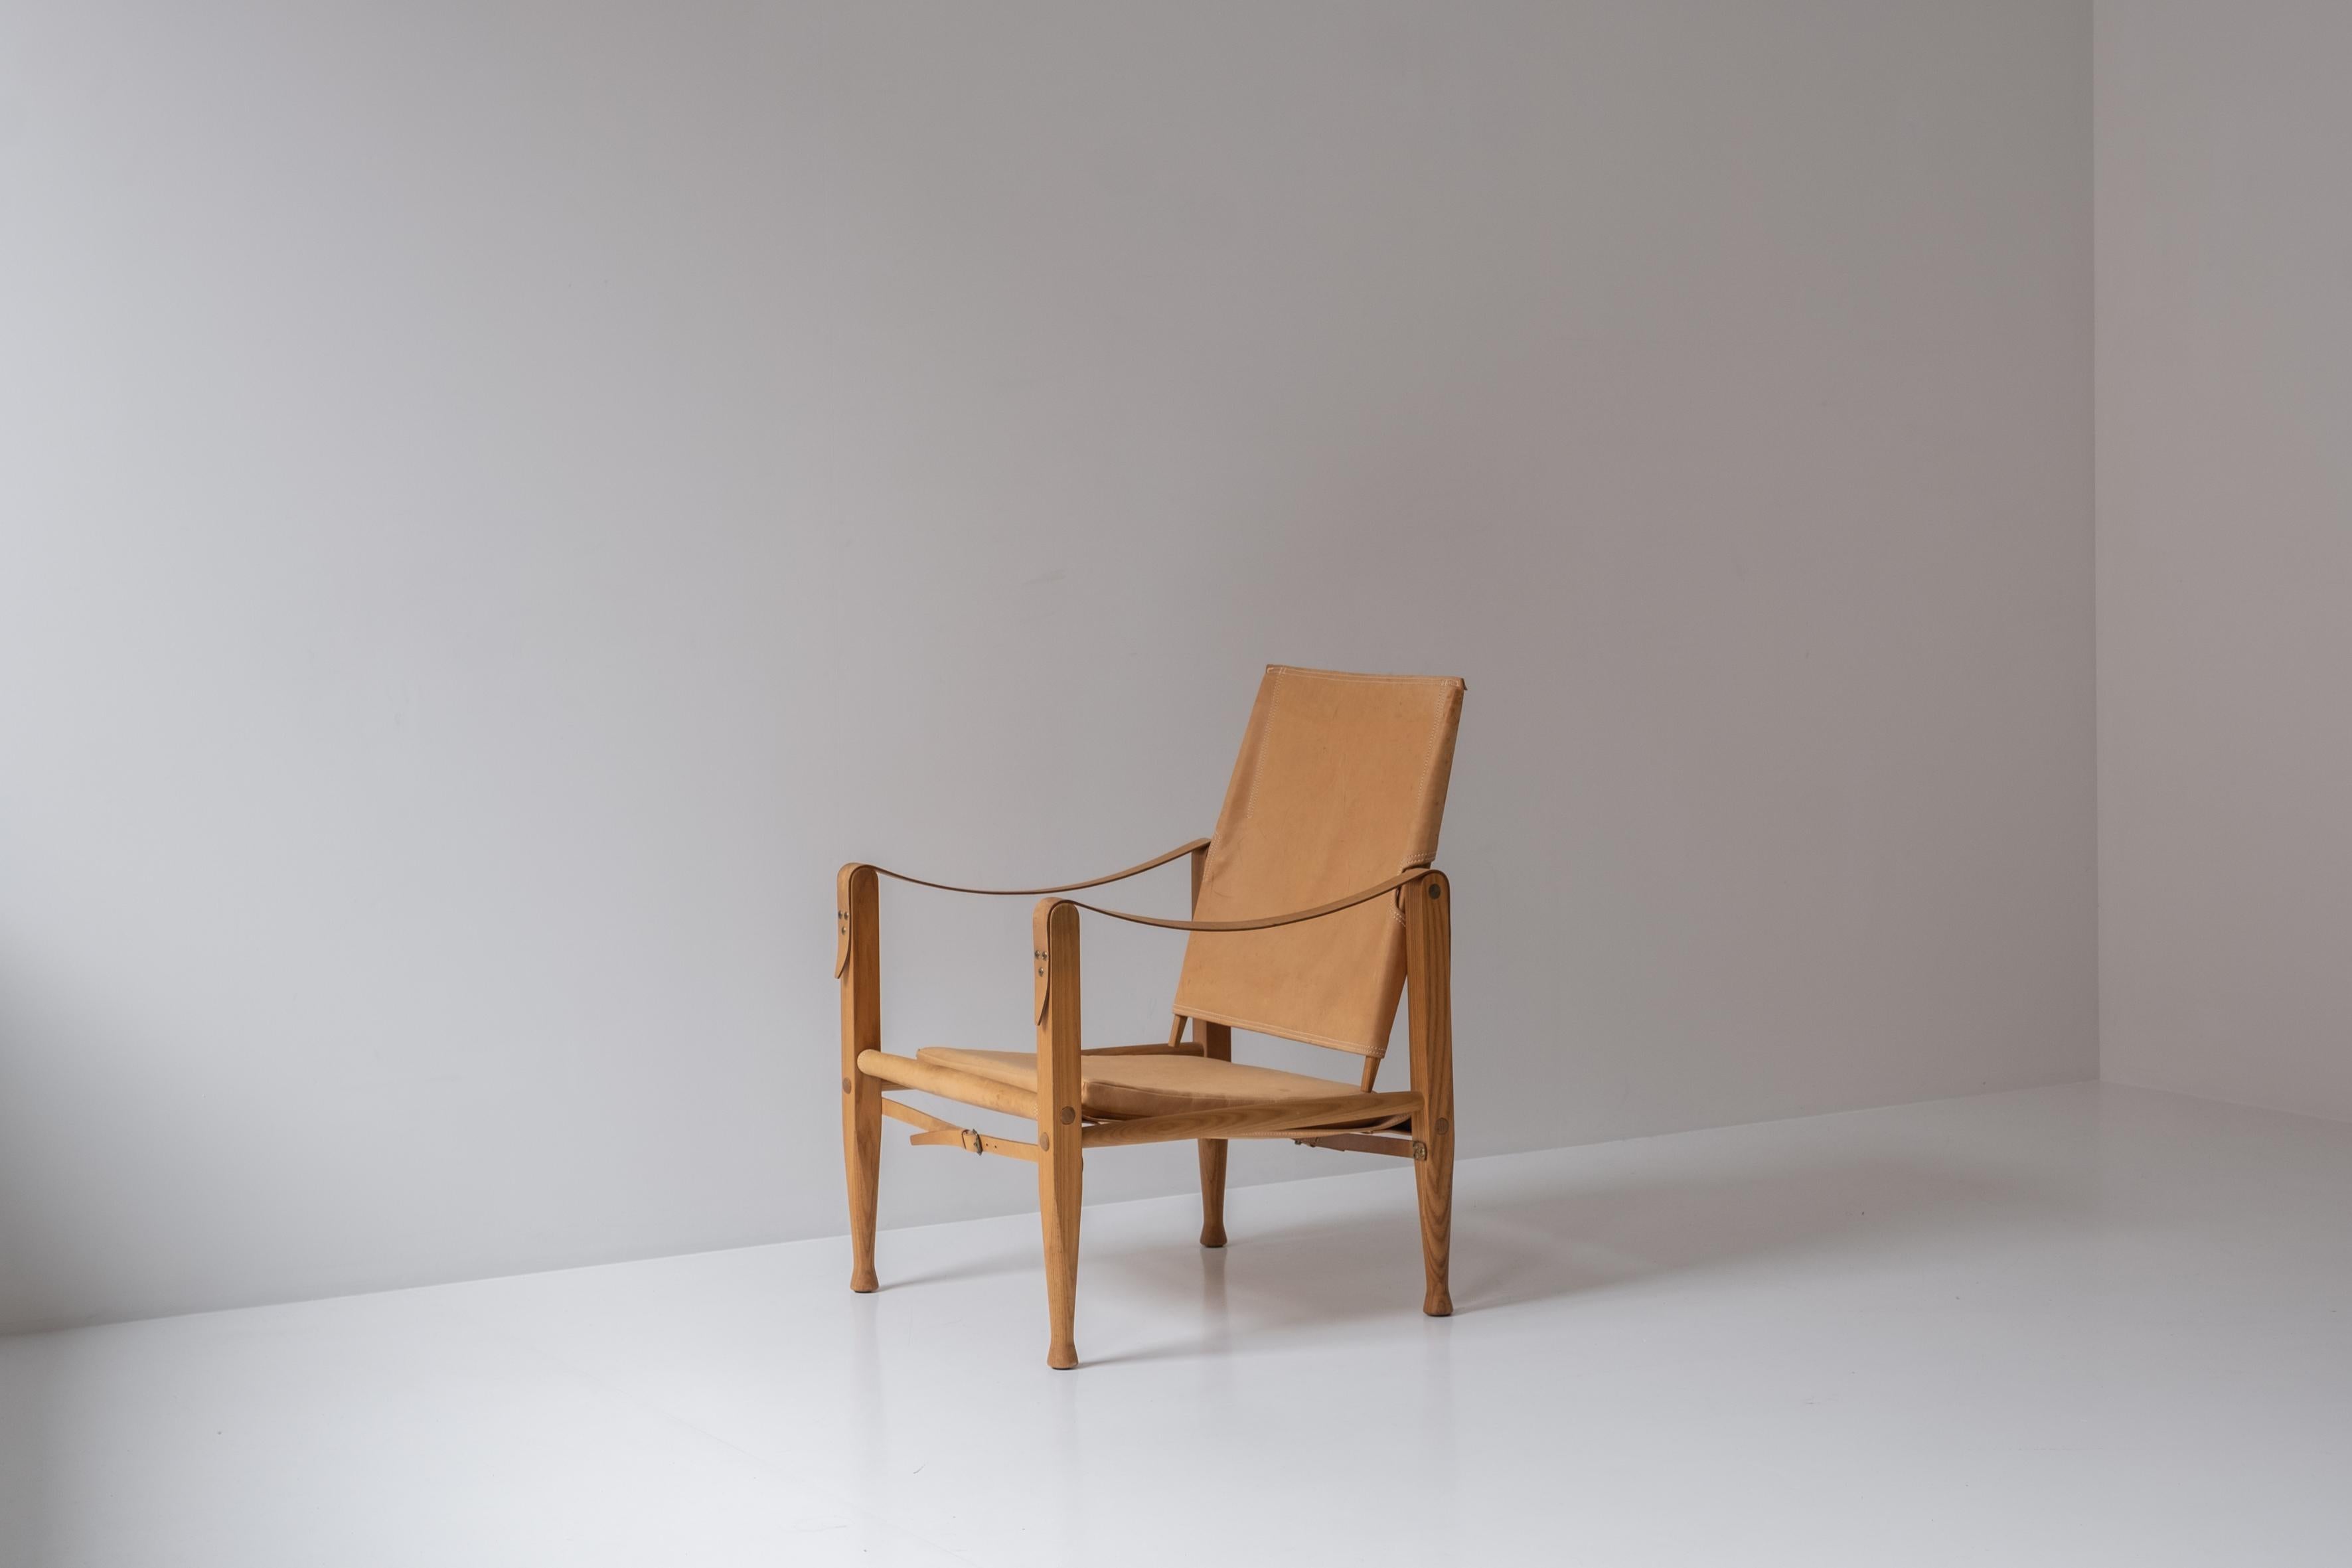 Lovely ‘Safari’ easy chair by Kaare Klint for Rud Rasmussen, Denmark 1950’s. This chair features a frame made out of oak and the original cognac leather seat and back with leather straps. Superp authentic condition.